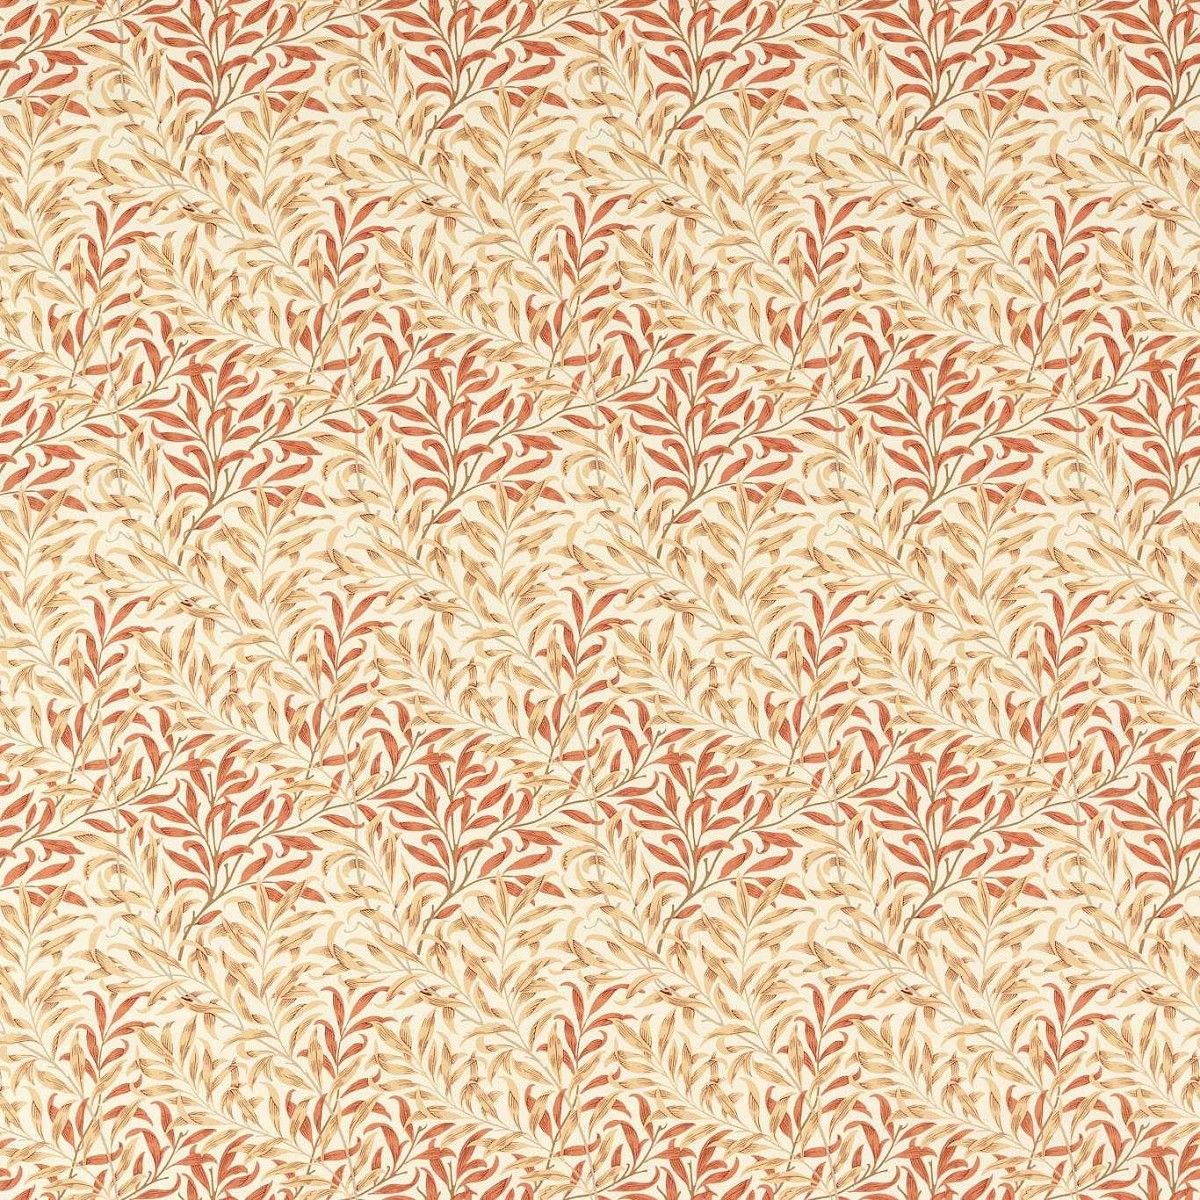 Willow Bough Outdoor Russet/Wheat Fabric by William Morris & Co.